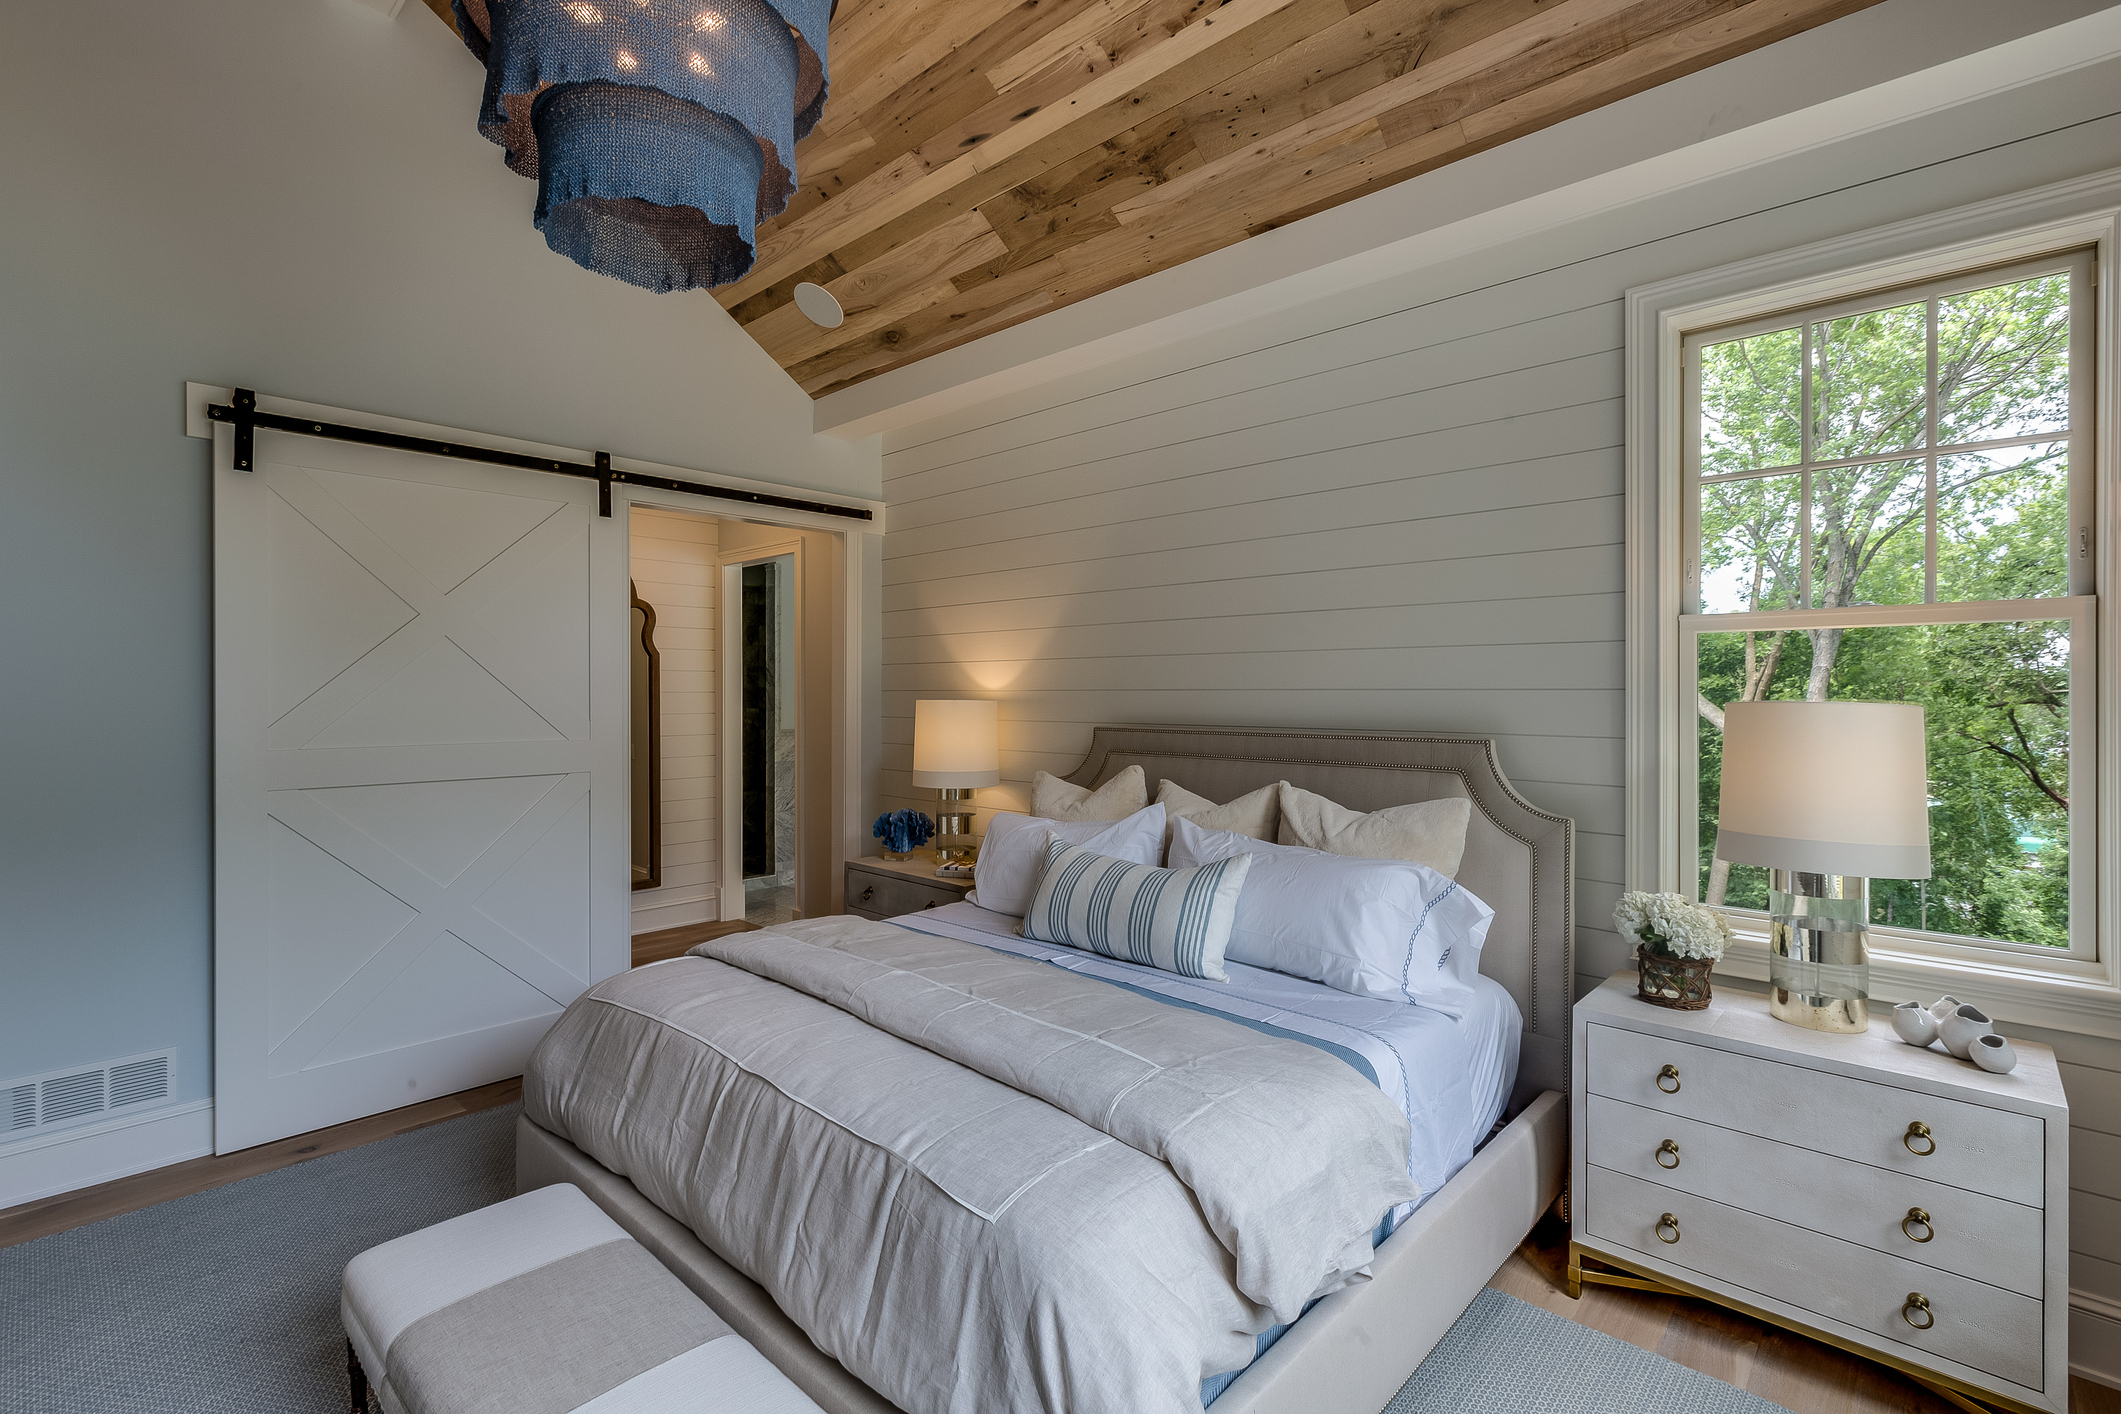 Rustic bedroom with a barn door, beamed ceiling, and a neatly made bed